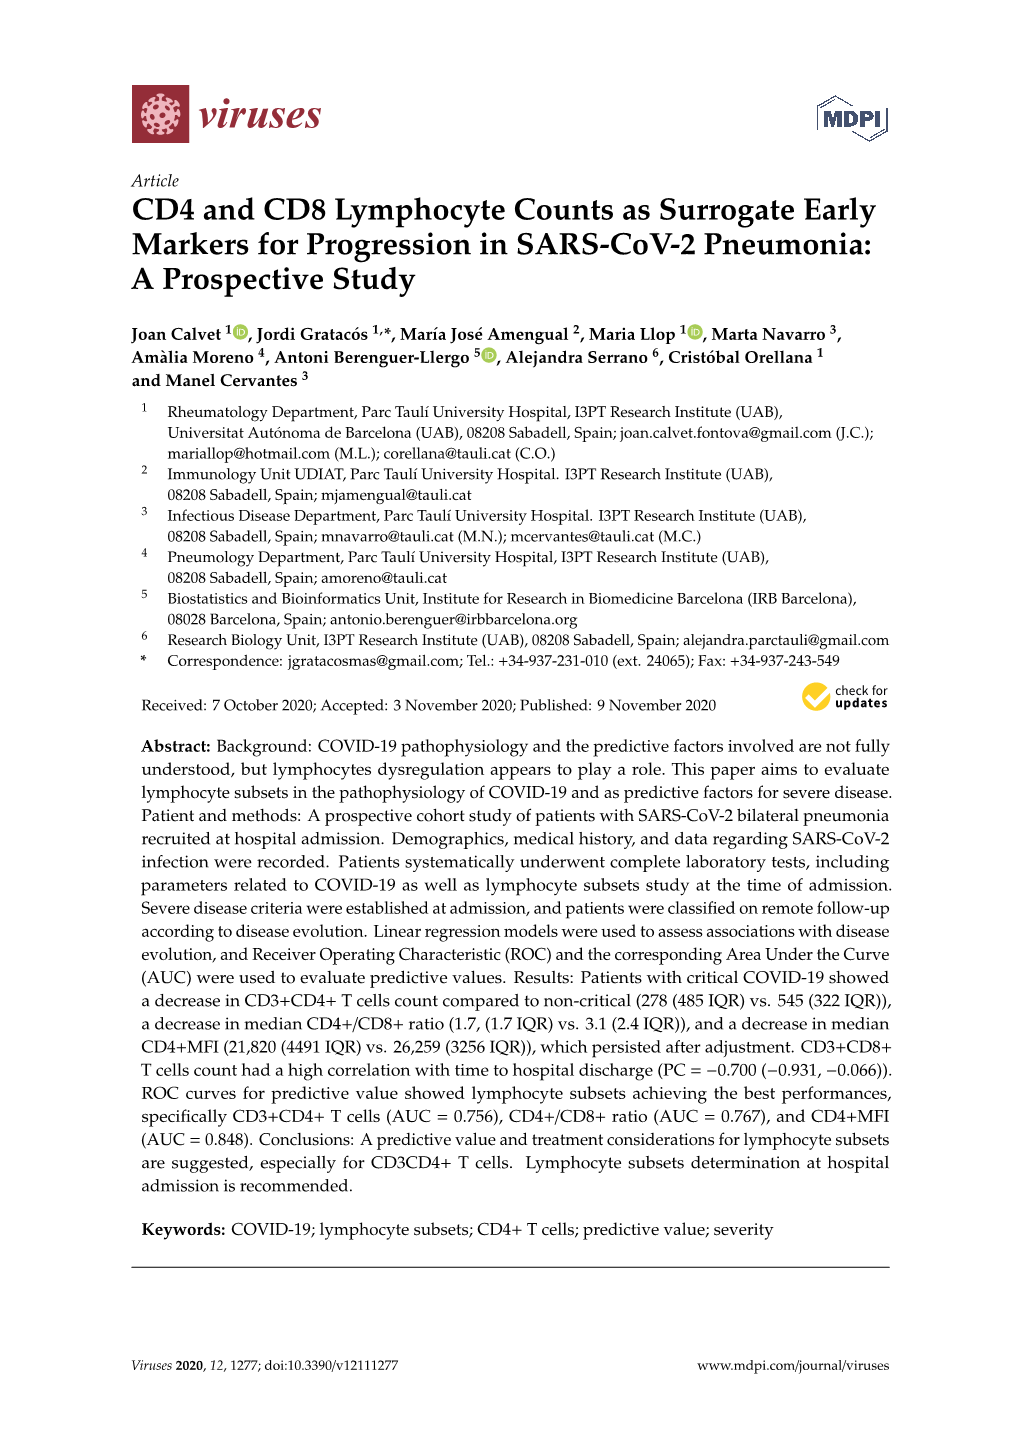 CD4 and CD8 Lymphocyte Counts As Surrogate Early Markers for Progression in SARS-Cov-2 Pneumonia: a Prospective Study